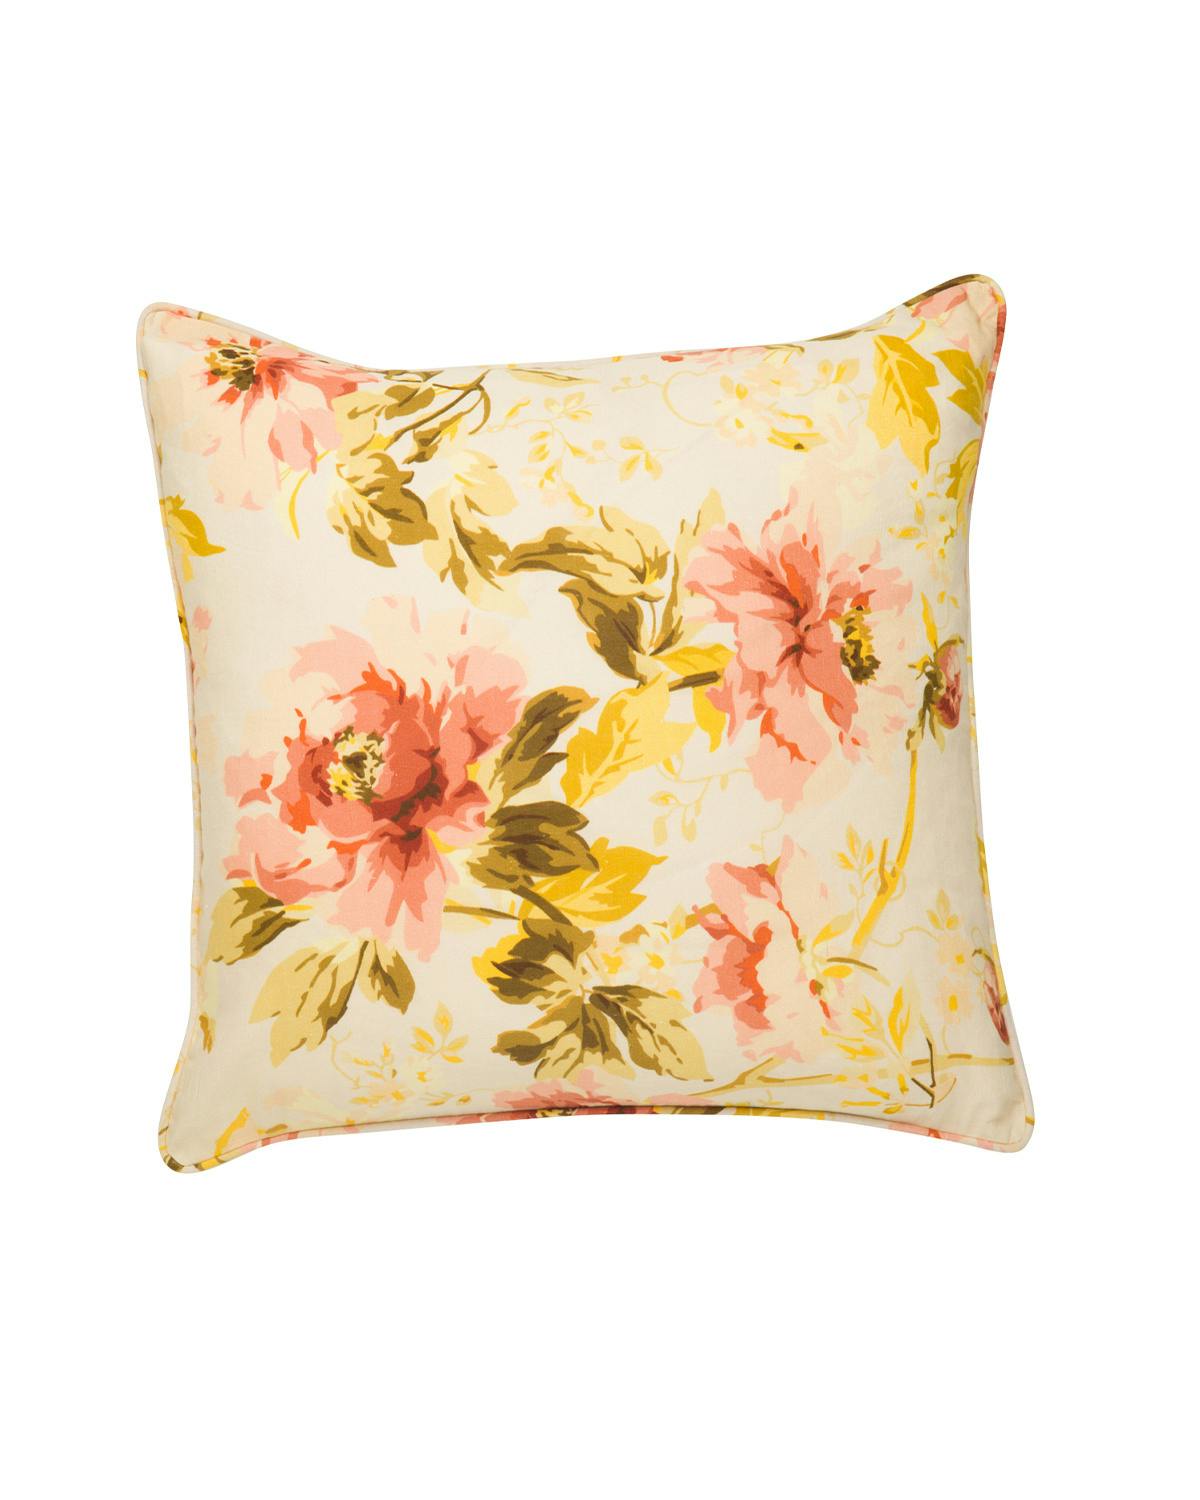 Cushion Cover Linen 60x60 cm, Blooming. Image #1